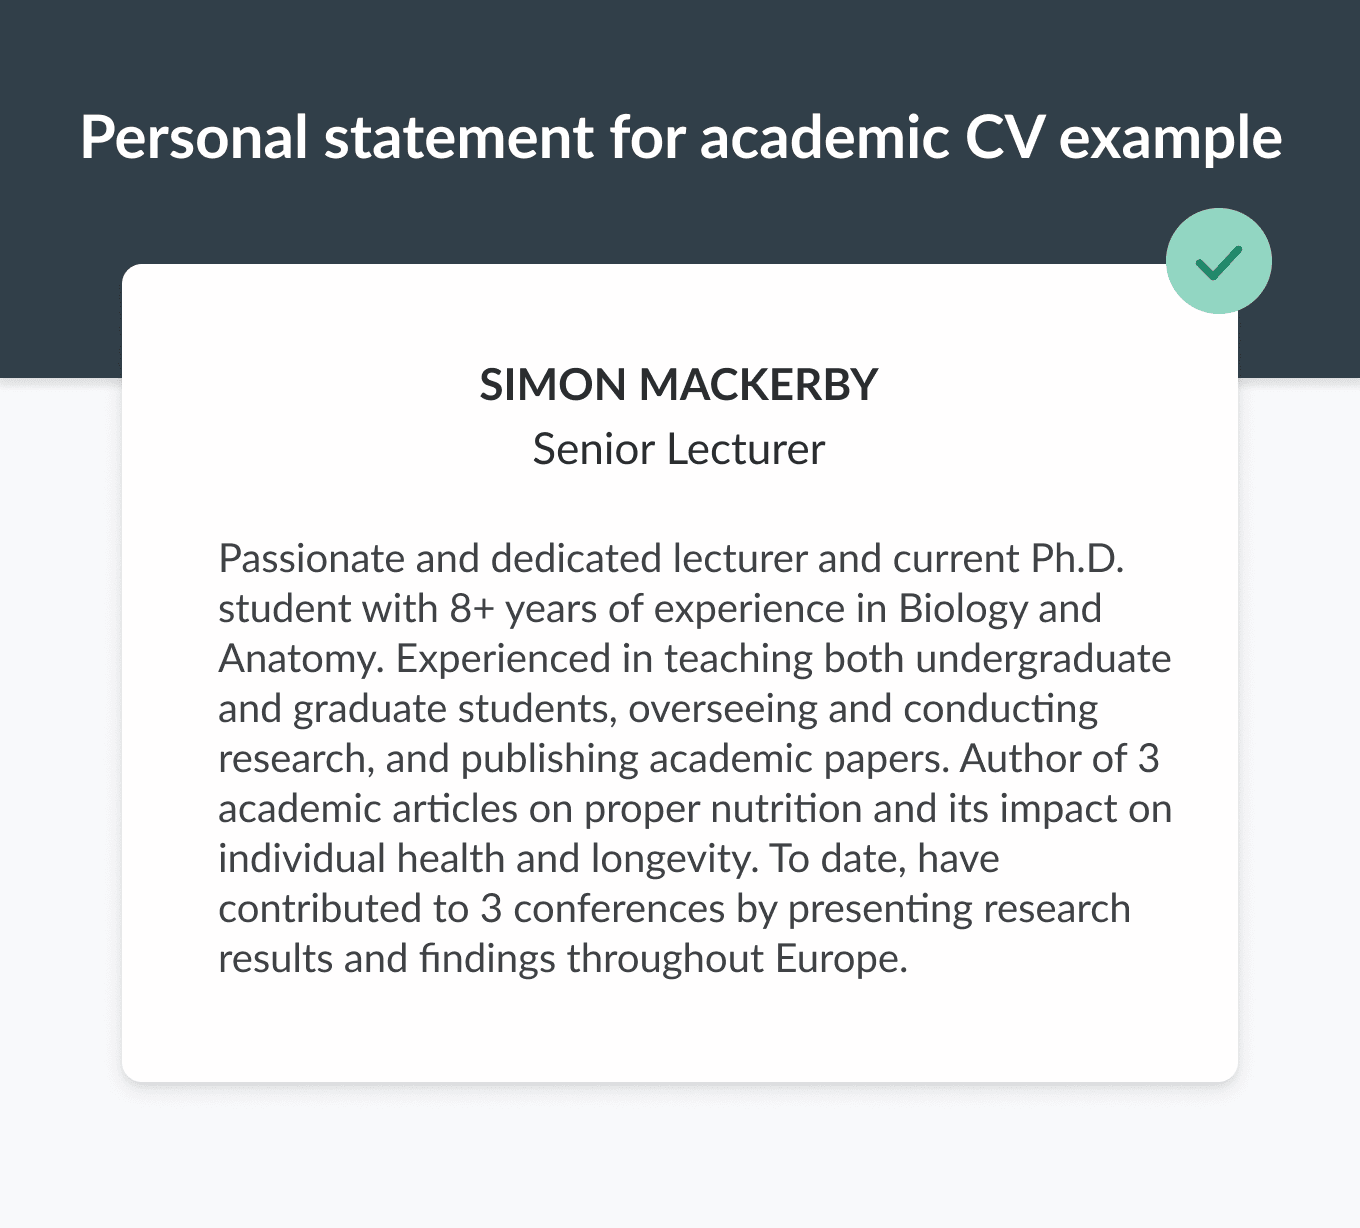 An example of a personal statement for an academic CV, outlining the applicant's teaching experience and research background in a few sentences.